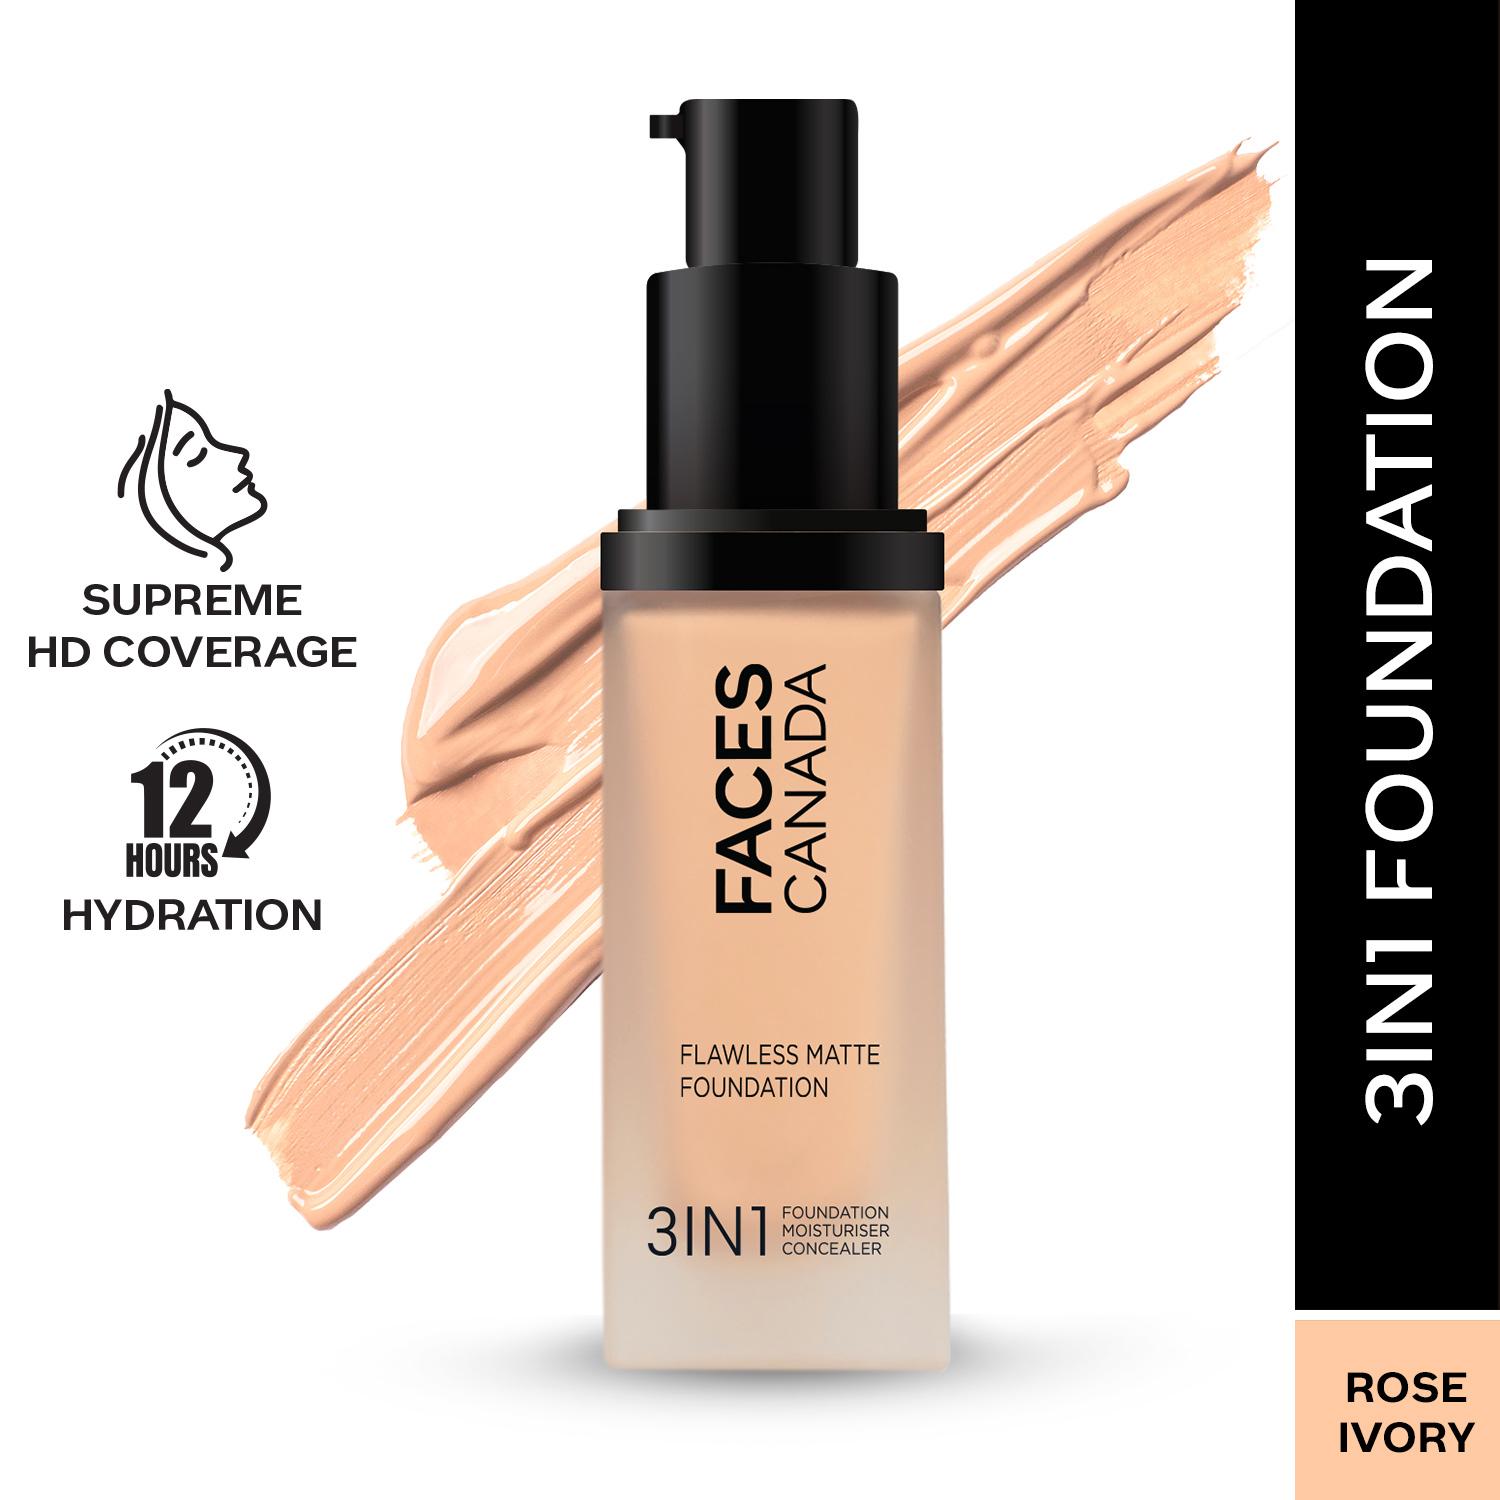 Faces Canada | Faces Canada Flawless Matte Foundation - Rose Ivory 011, 12 HR Hydration + SPF 18 (30 ml)